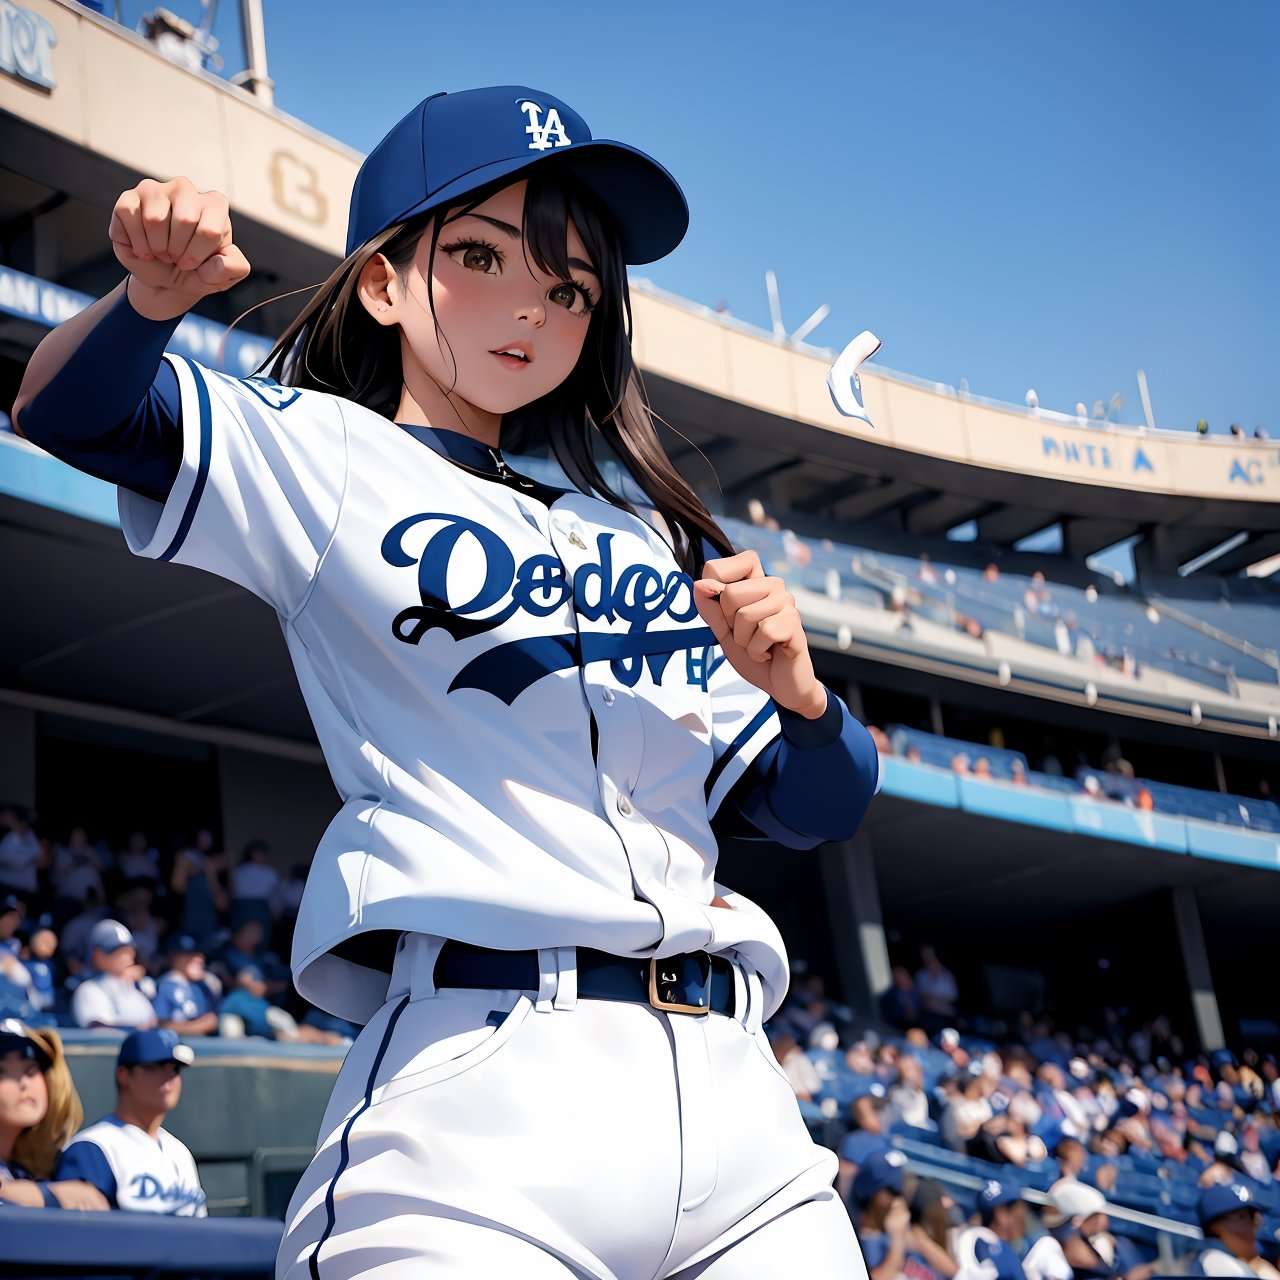 masterpiece, ultra high res, absurdres,photo realistic, 
A young woman who is a fan of Shohei Ohtani is cheering for him (from the outfield seats at Dodger Stadium), wearing a Dodgers jacket , as he steps up to the plate.